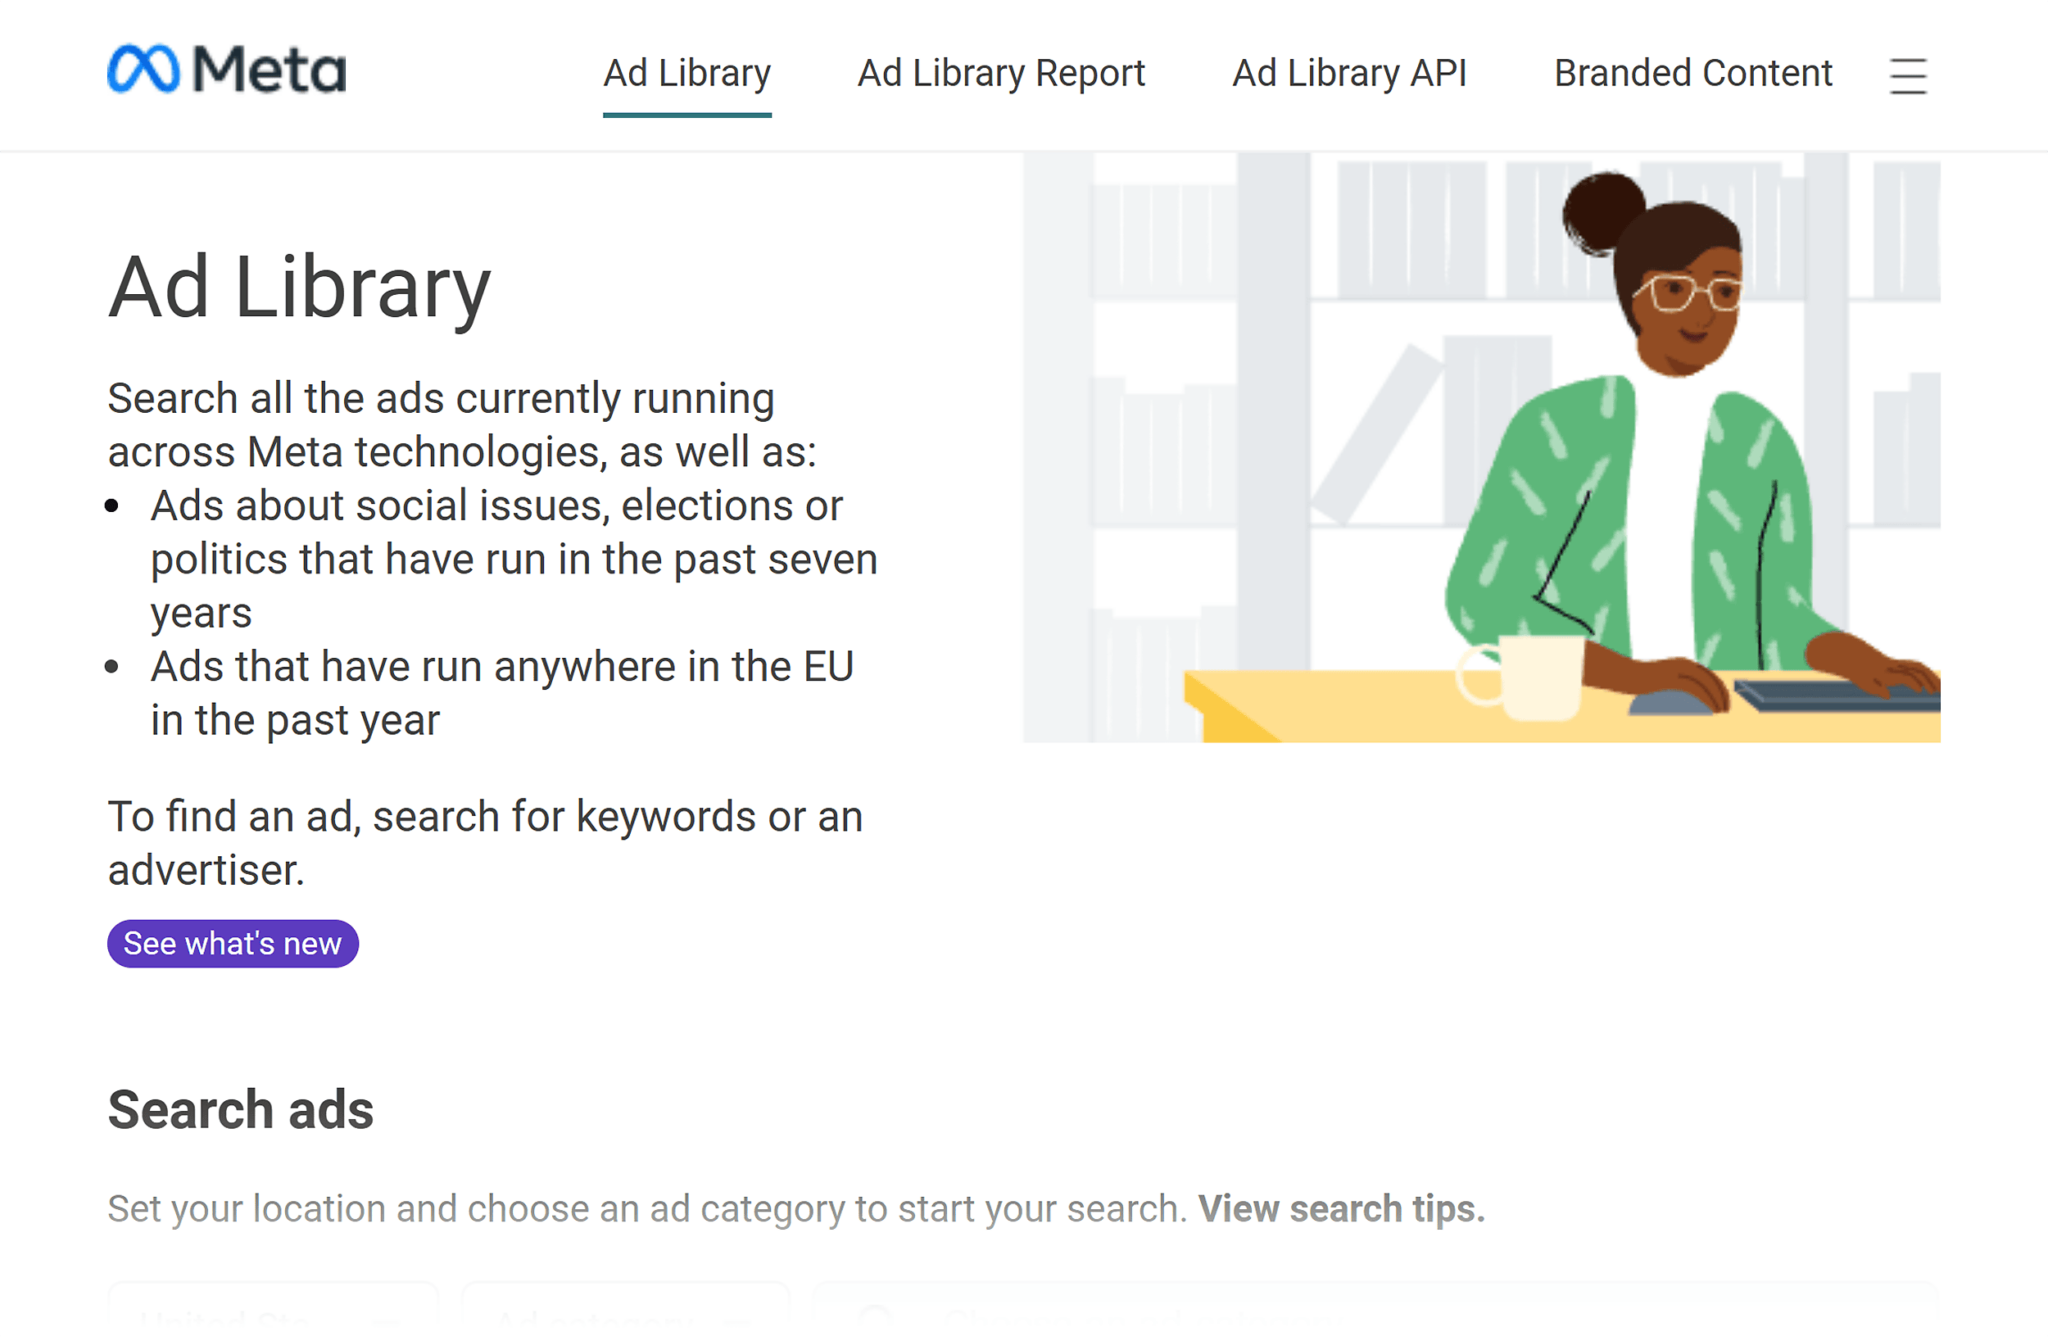 meta-ad-library 29 Top Digital Marketing Tools for Every Budget